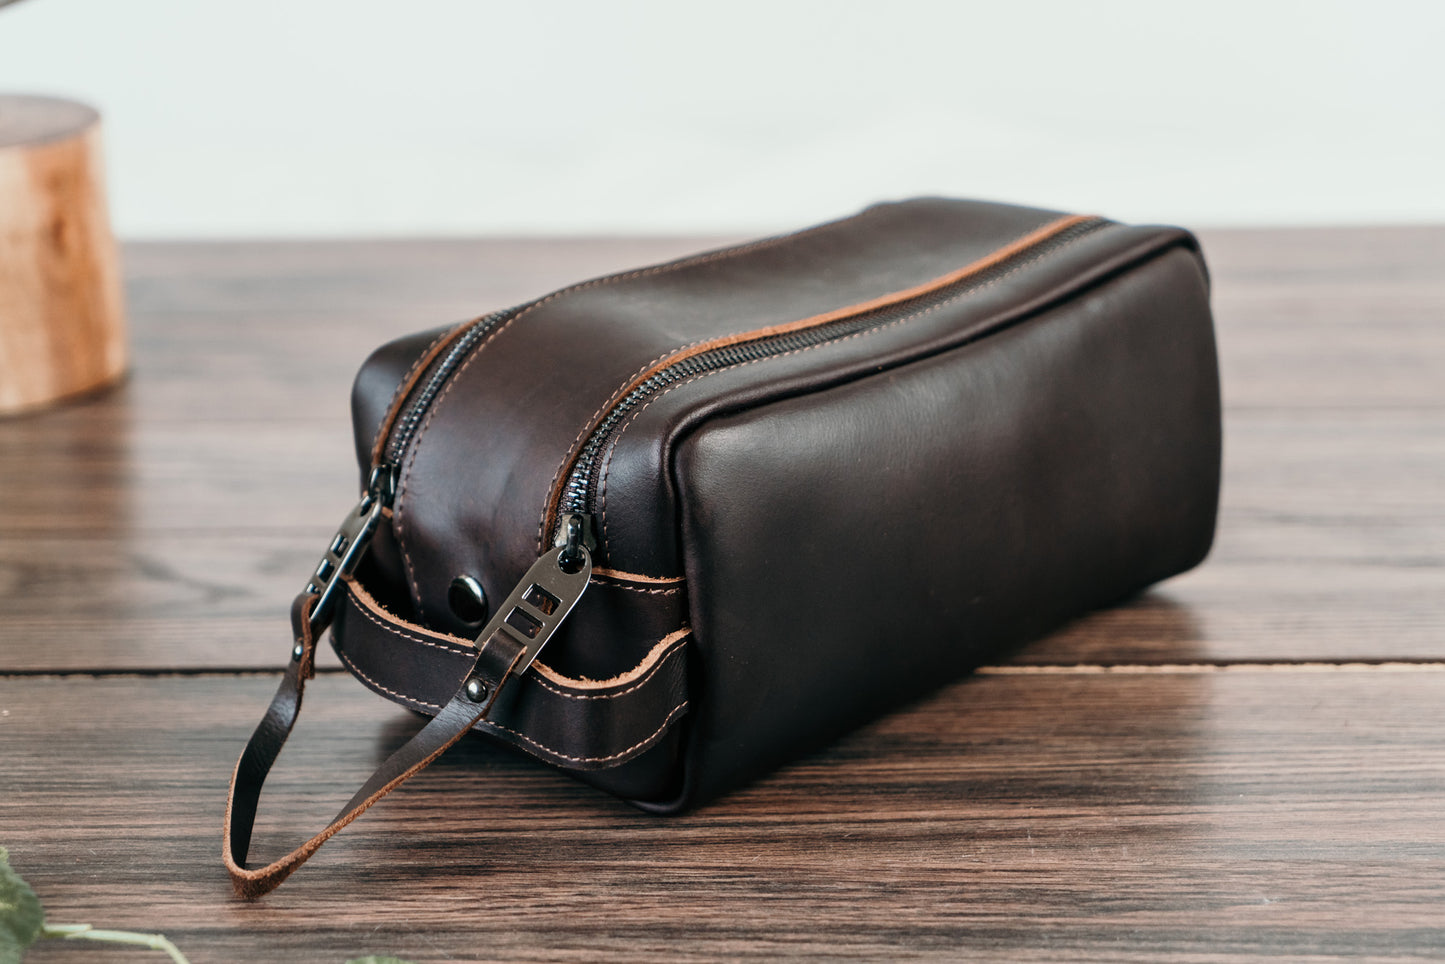 Load image into Gallery viewer, Leather Toiletry Double Zipper Bag | Black
